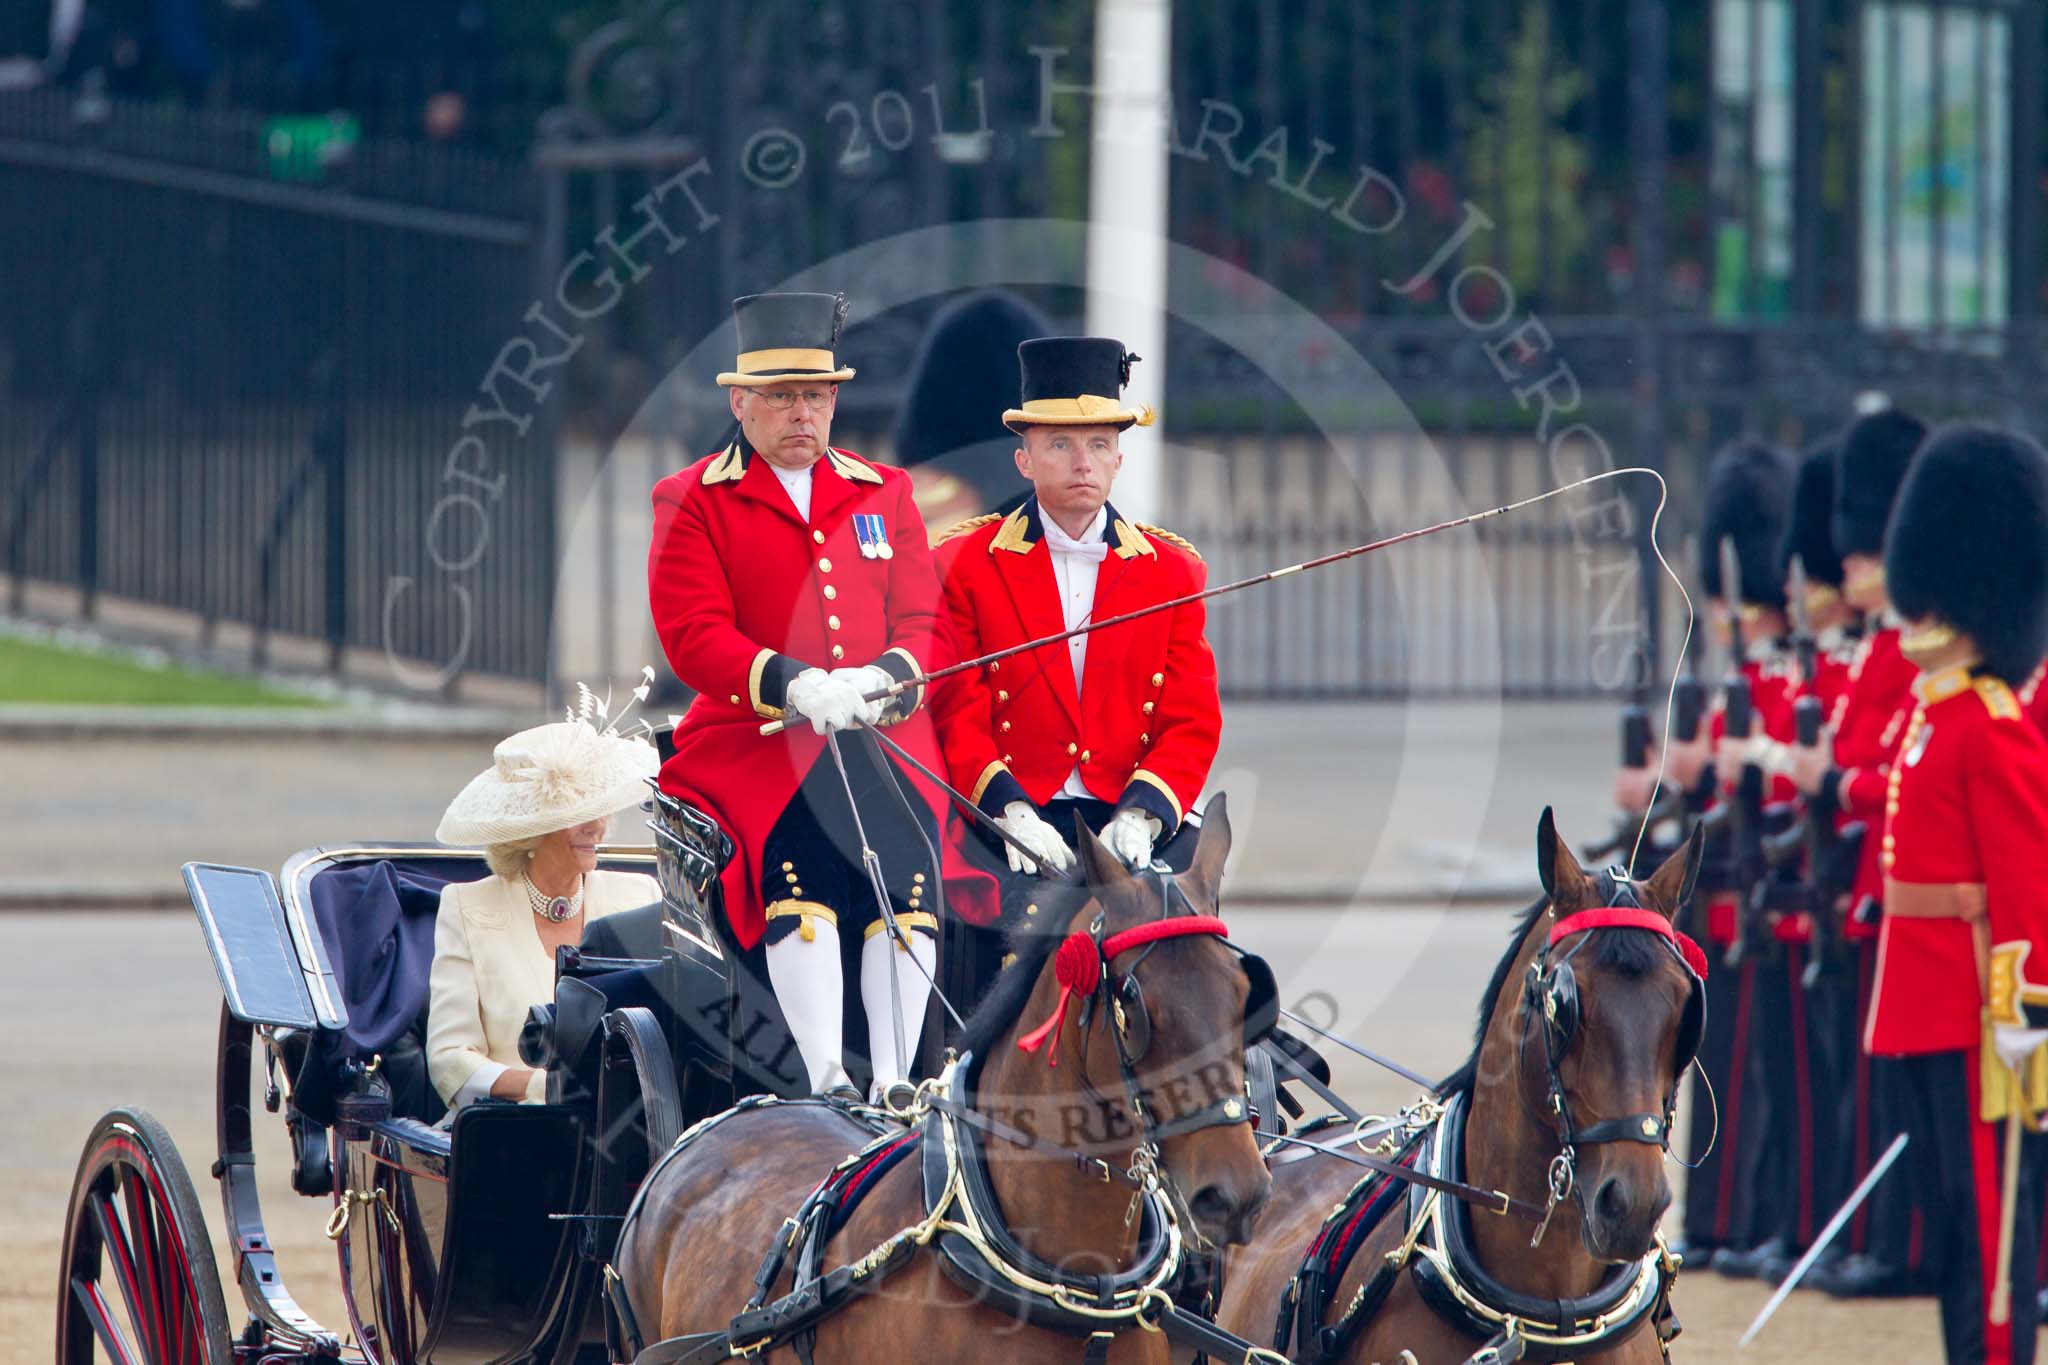 Trooping the Colour 2011: HRH The Duchess of Cornwall in the first barouche carriage arriving at Horse Guards Parade..
Horse Guards Parade, Westminster,
London SW1,
Greater London,
United Kingdom,
on 11 June 2011 at 10:50, image #85